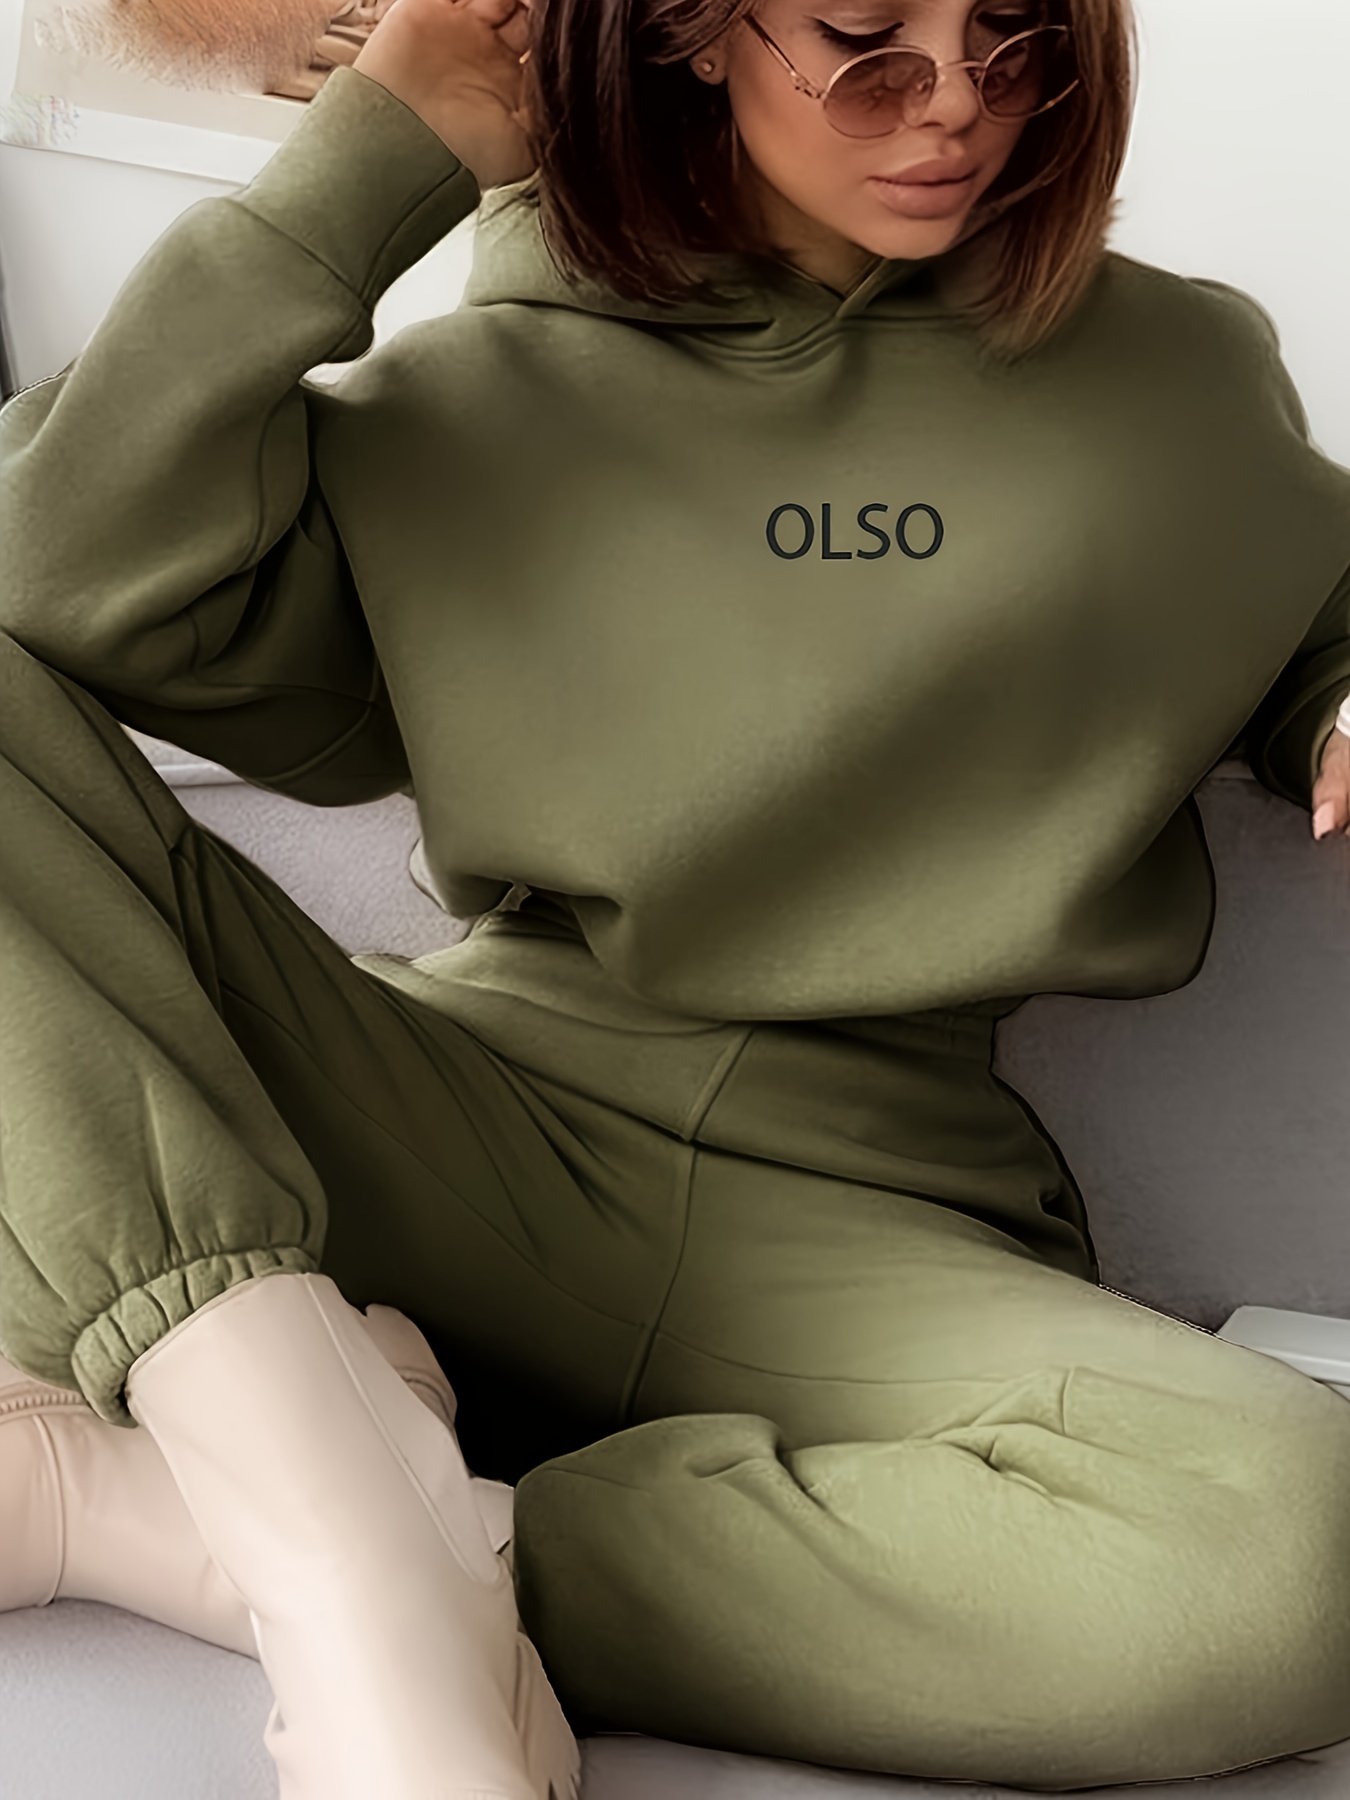 Designer Letter Print Hoodie & Sweatpants Set Unisex Long Sleeve T Shirt &  Pants For Wholesale, With 10% Discount From Lhldhgate03, $8.84